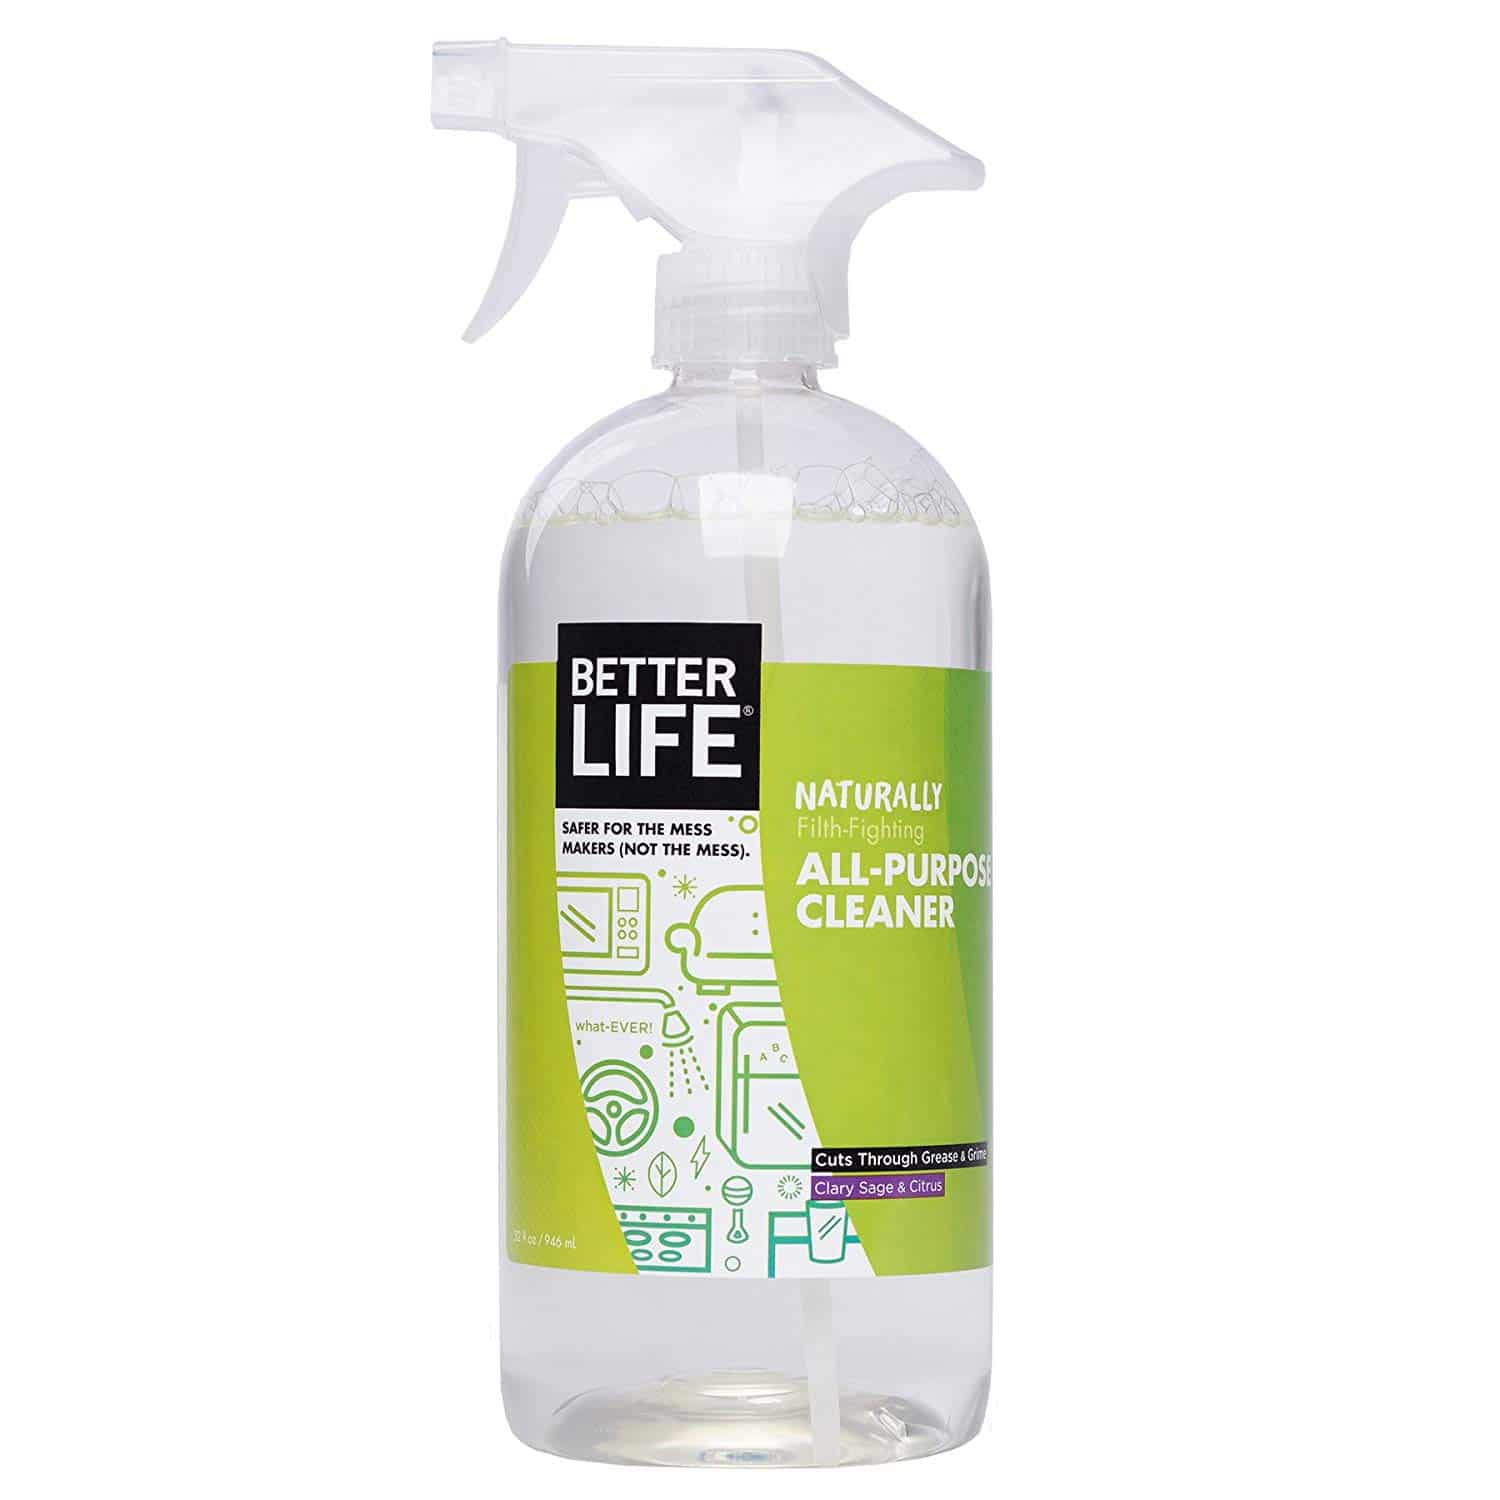 15 Pet Safe Non Toxic Cleaners We Love The Dog People By Rover Com